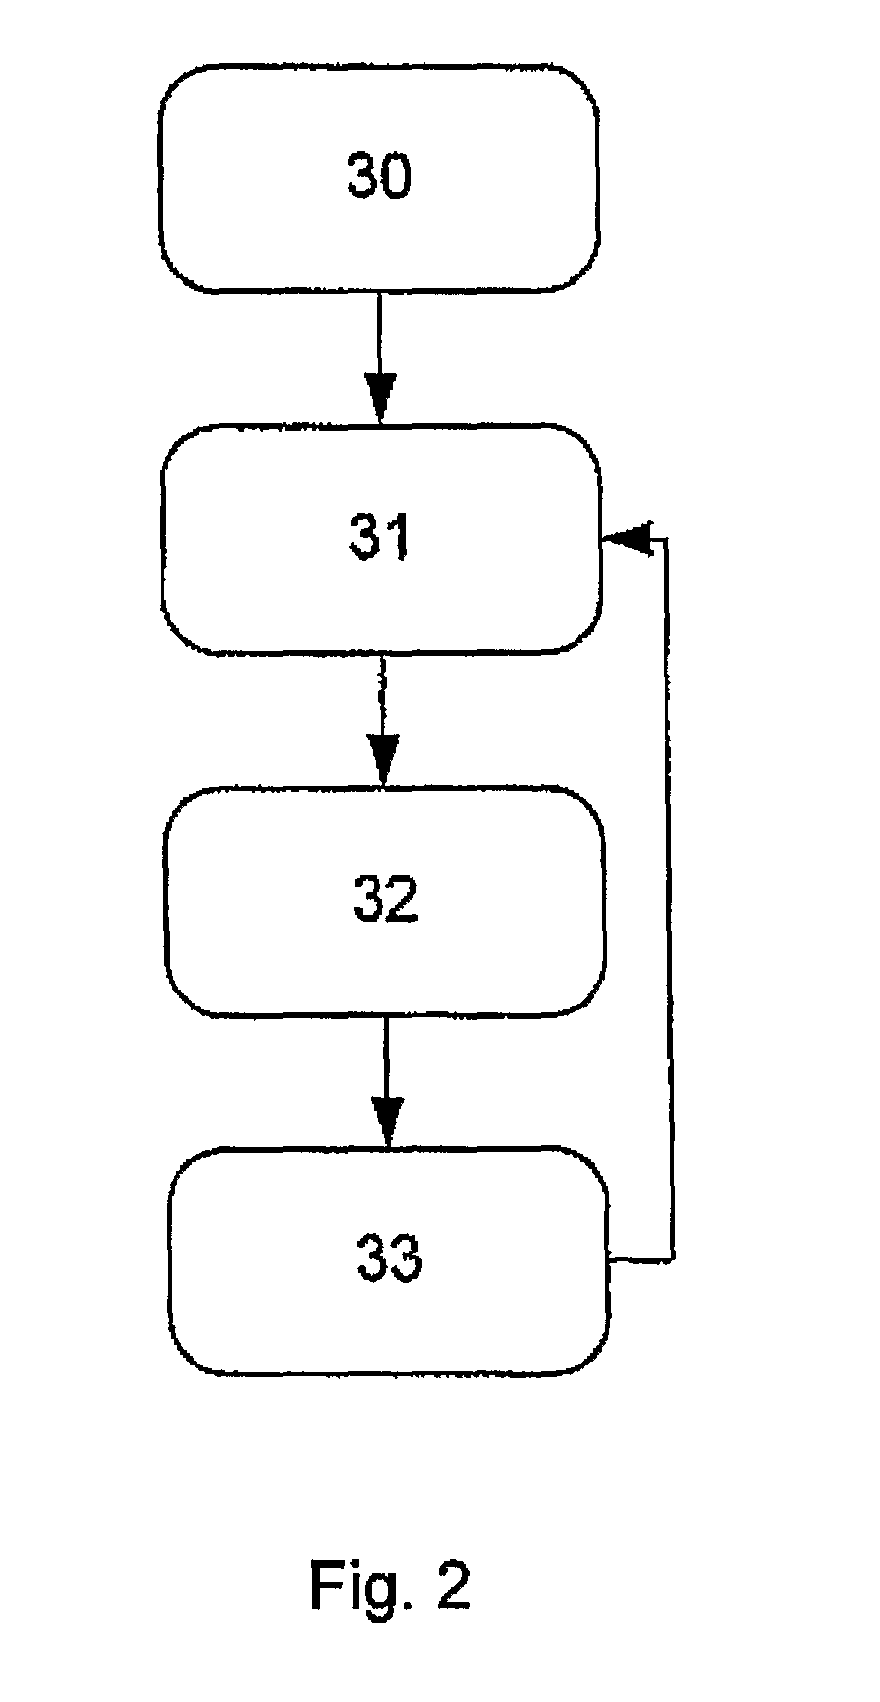 Method for production optimization in an oil and/or gas production system